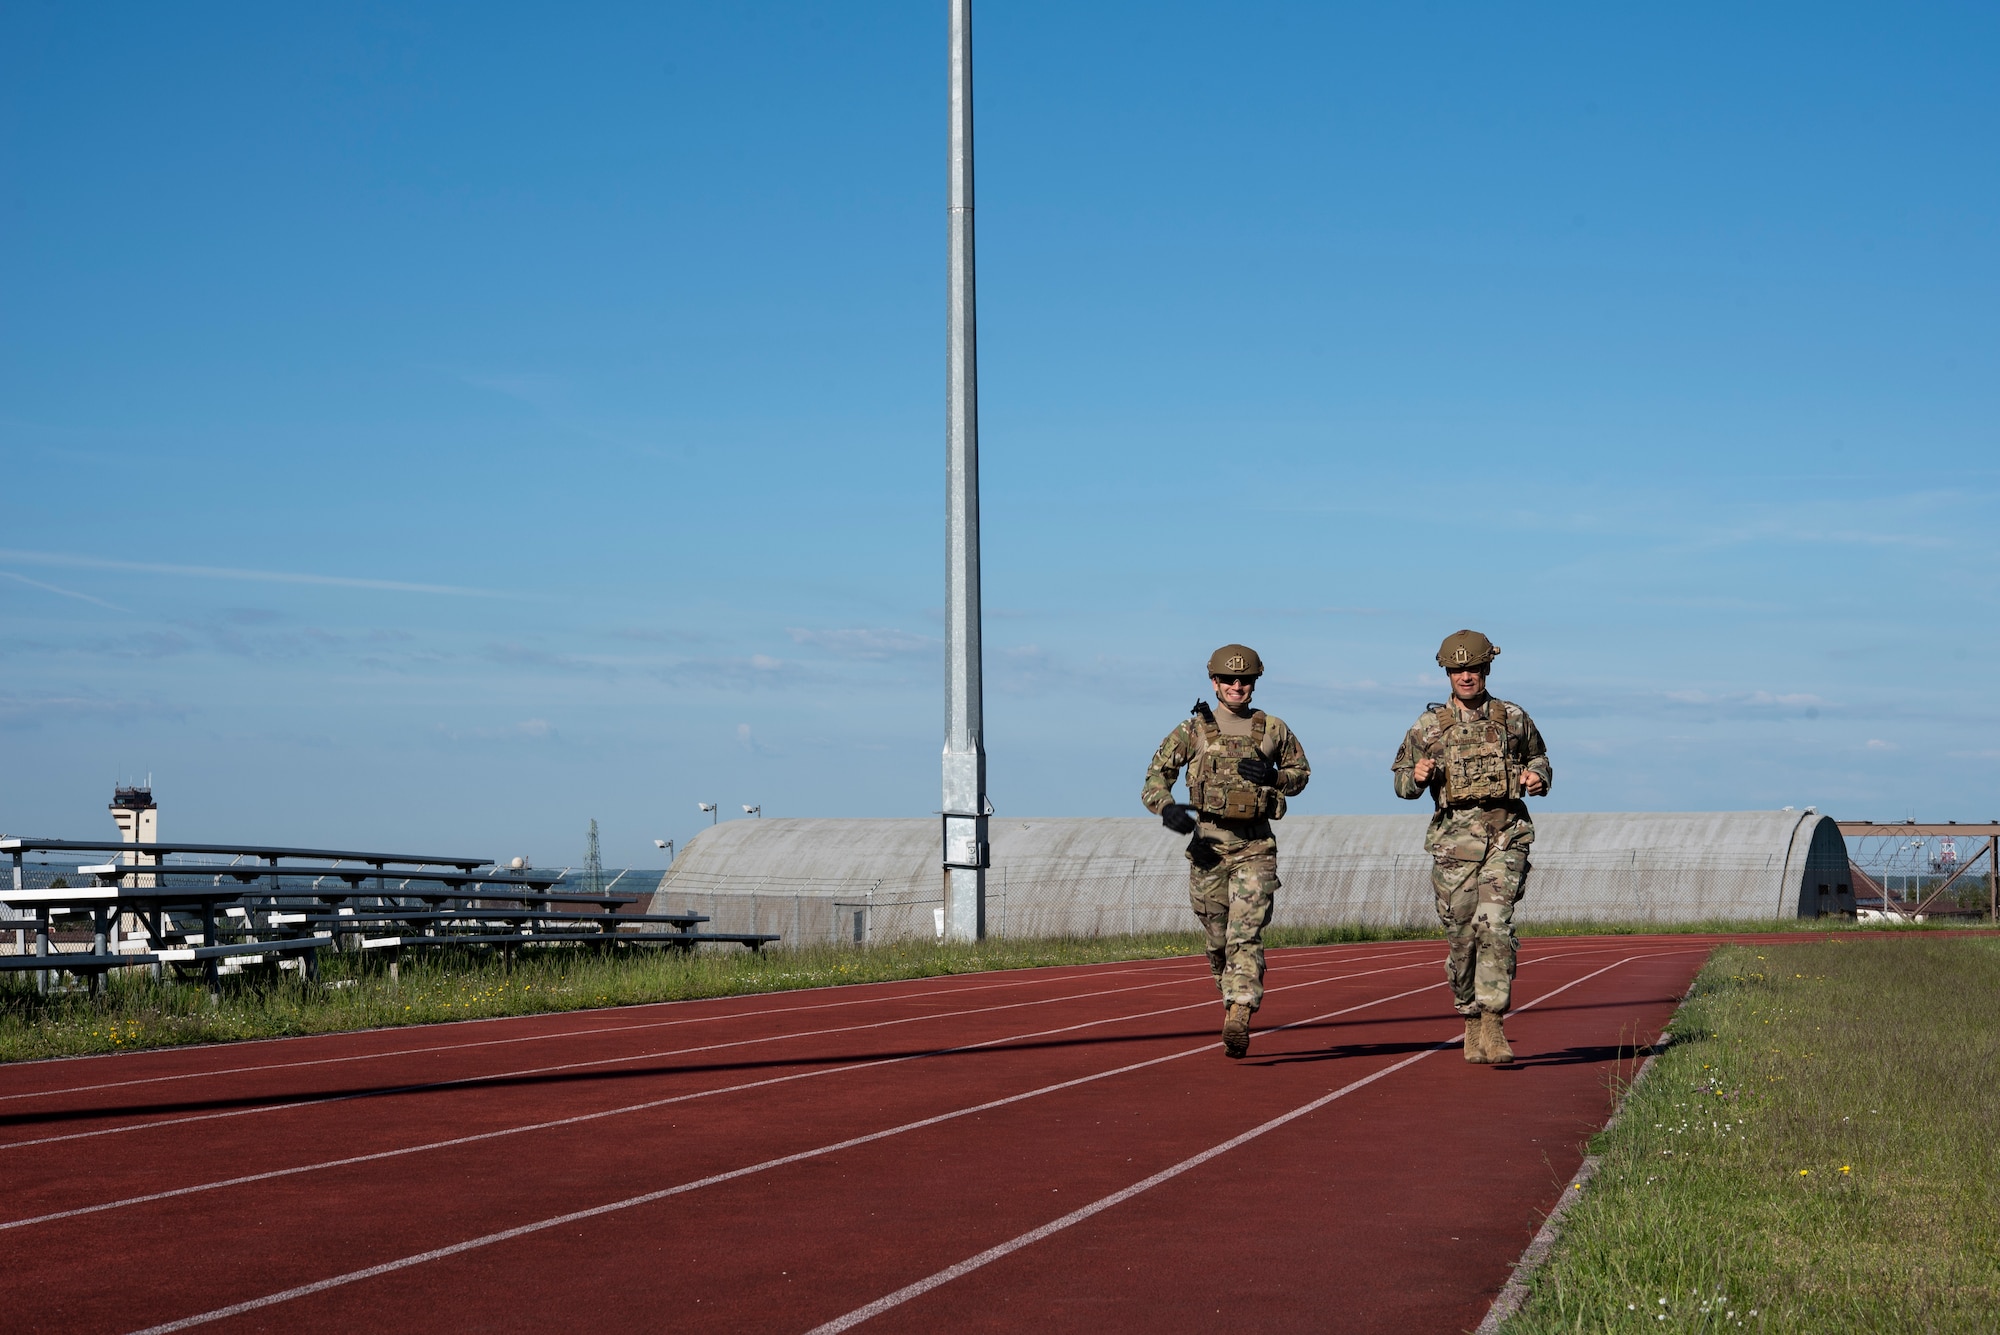 U.S. Air Force Lt. Col. Ben Washburn, 52nd Security Forces Squadron commander (right), and 2nd  Lt. Nicolas Niazian participate in the Defender Challenge at Spangdahlem Air Base, Germany, June 2, 2021.